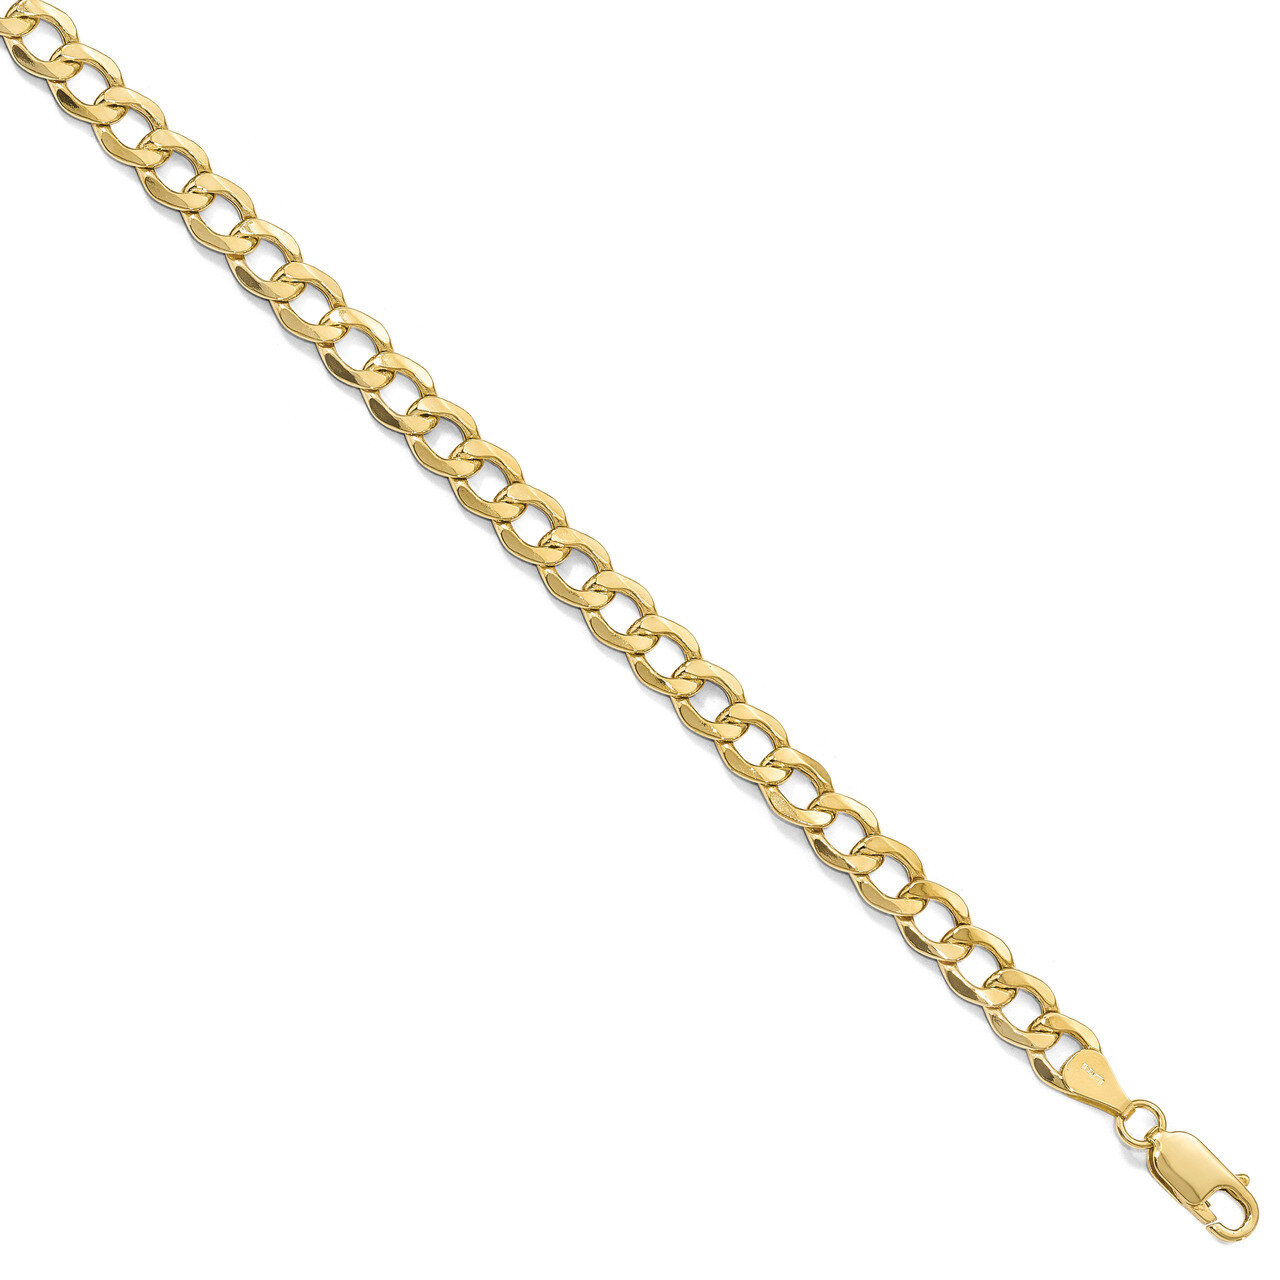 6.5mm Semi-Solid Curb Link Chain 8 Inch 10k Gold HB-8242-8